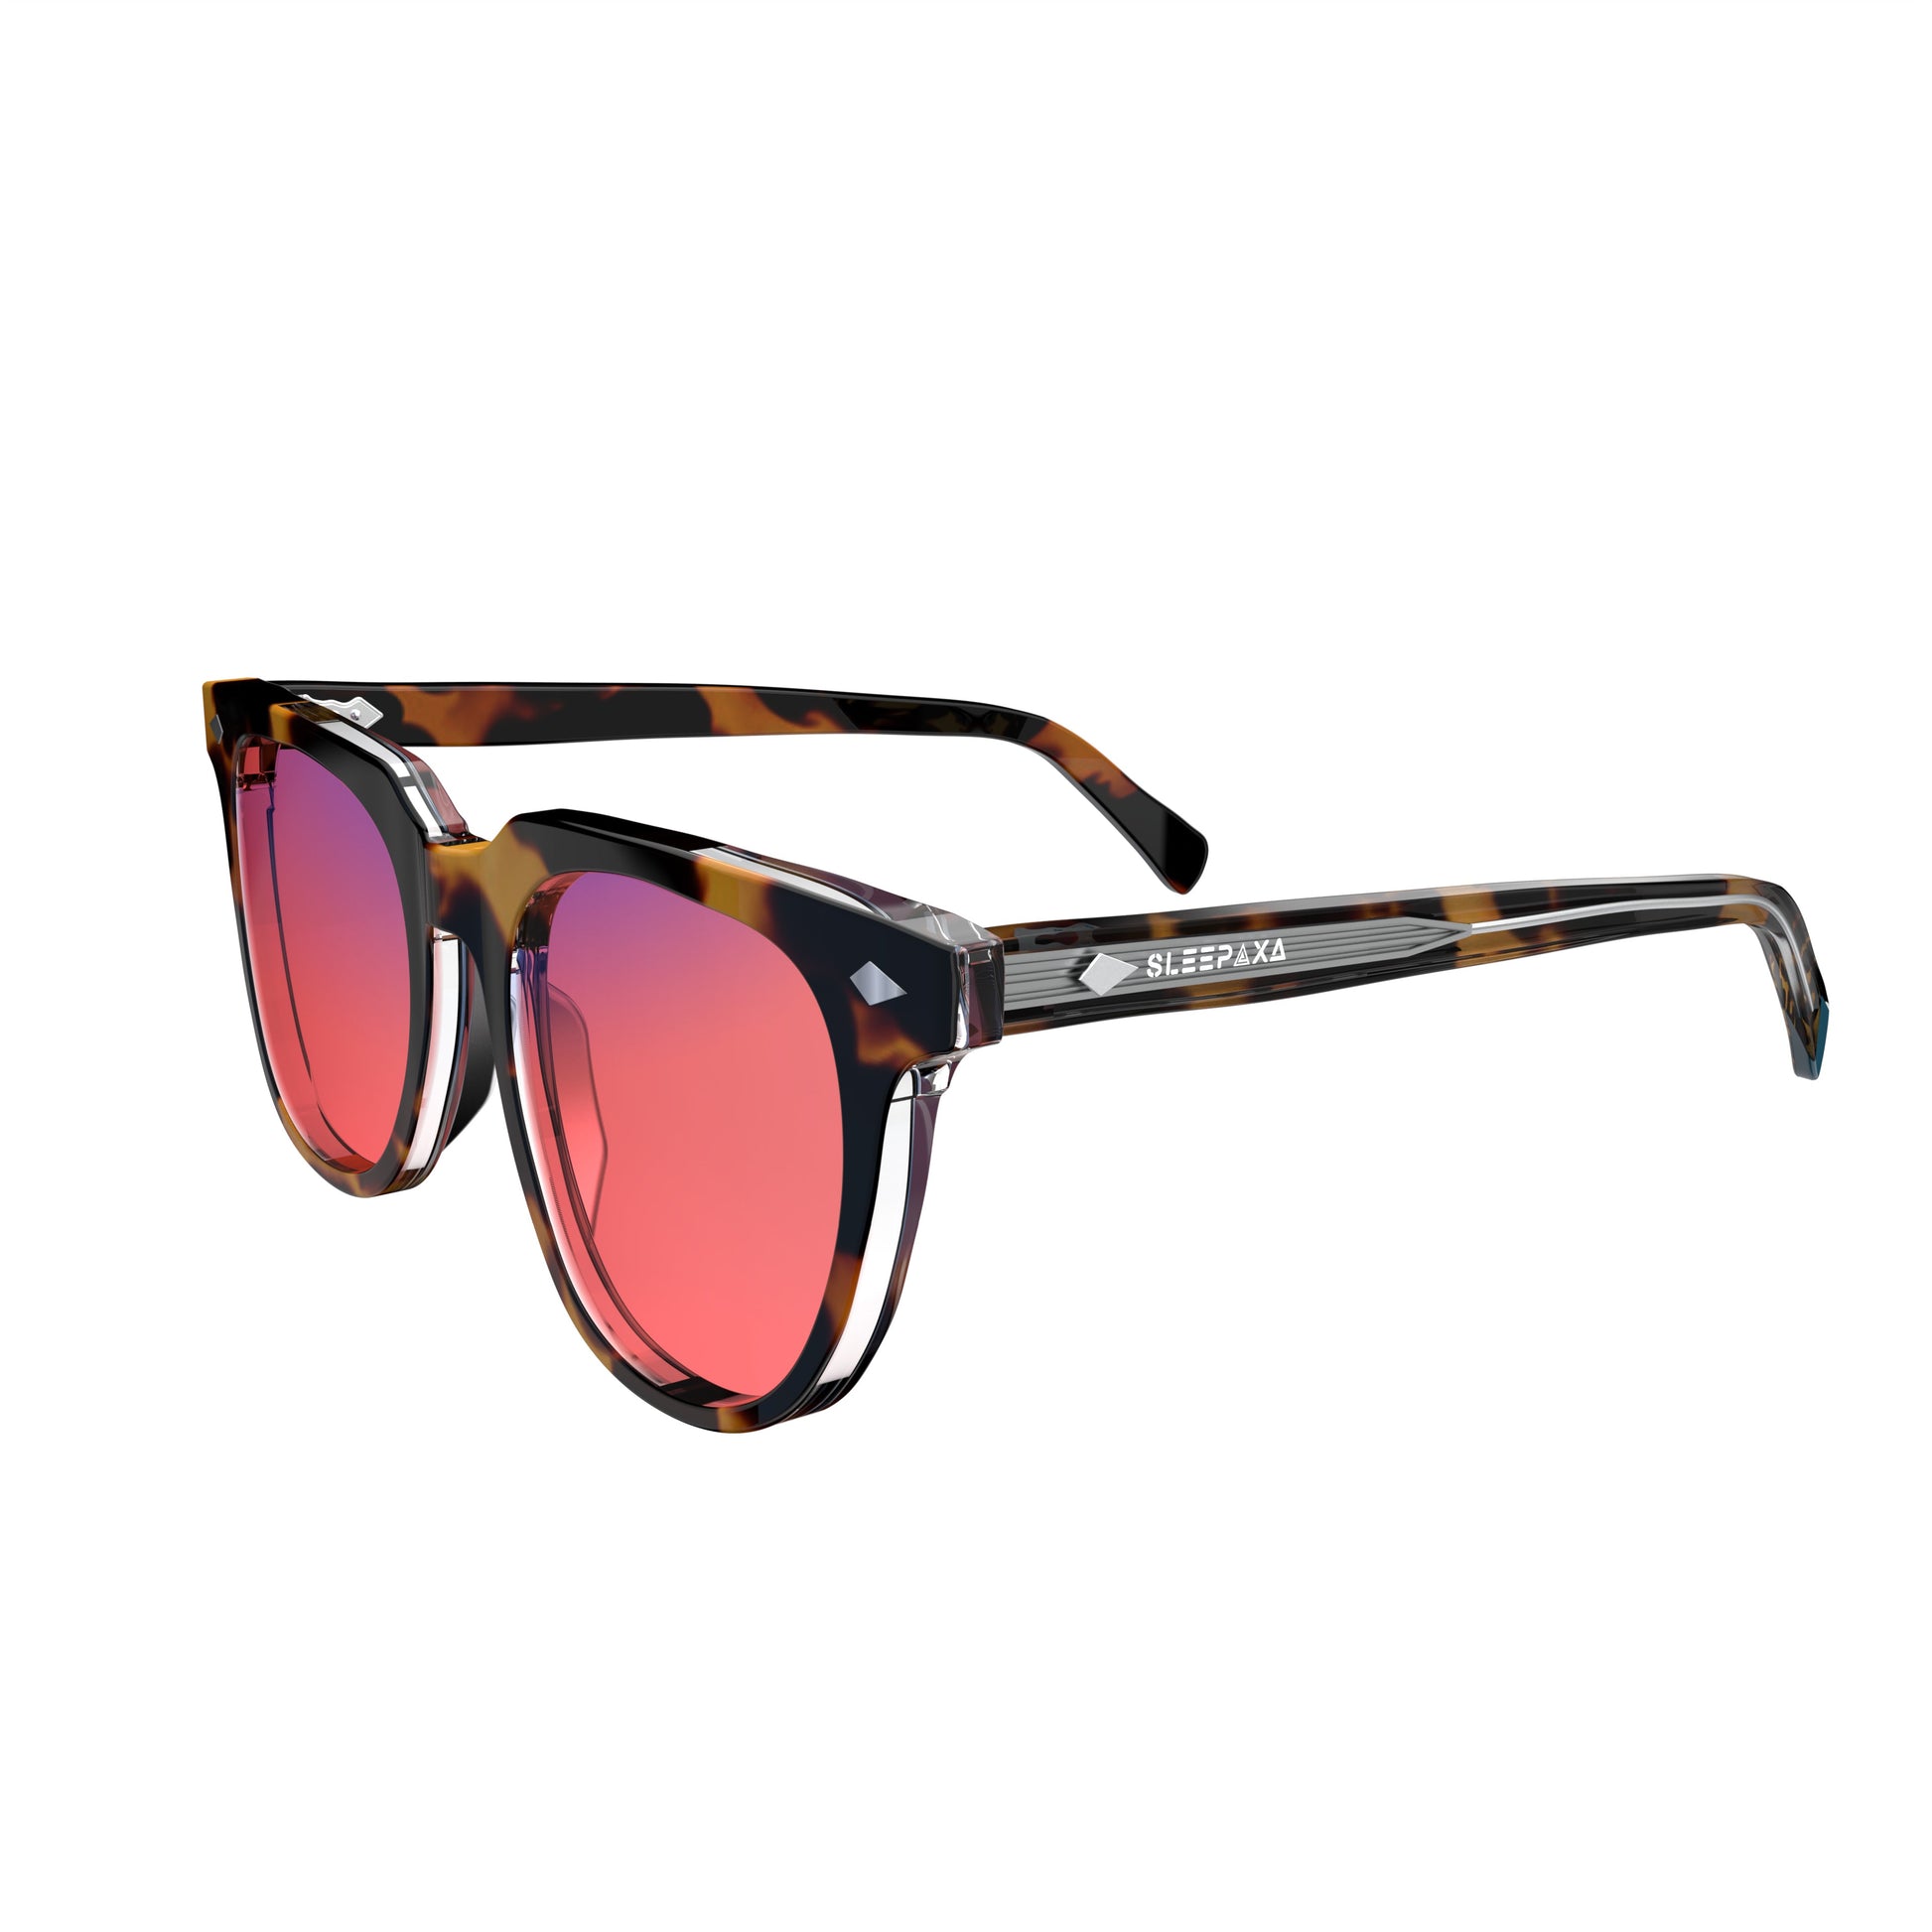 Side view of Sleepaxa Elixir FL-41 Migraine Glasses with Tiger Printed Brown frame, Acetate temples, and rose-tinted lenses with blue block and blue anti reflection properties , designed with smooth high-quality acetate frame material for Migraine & Light Sensitivity